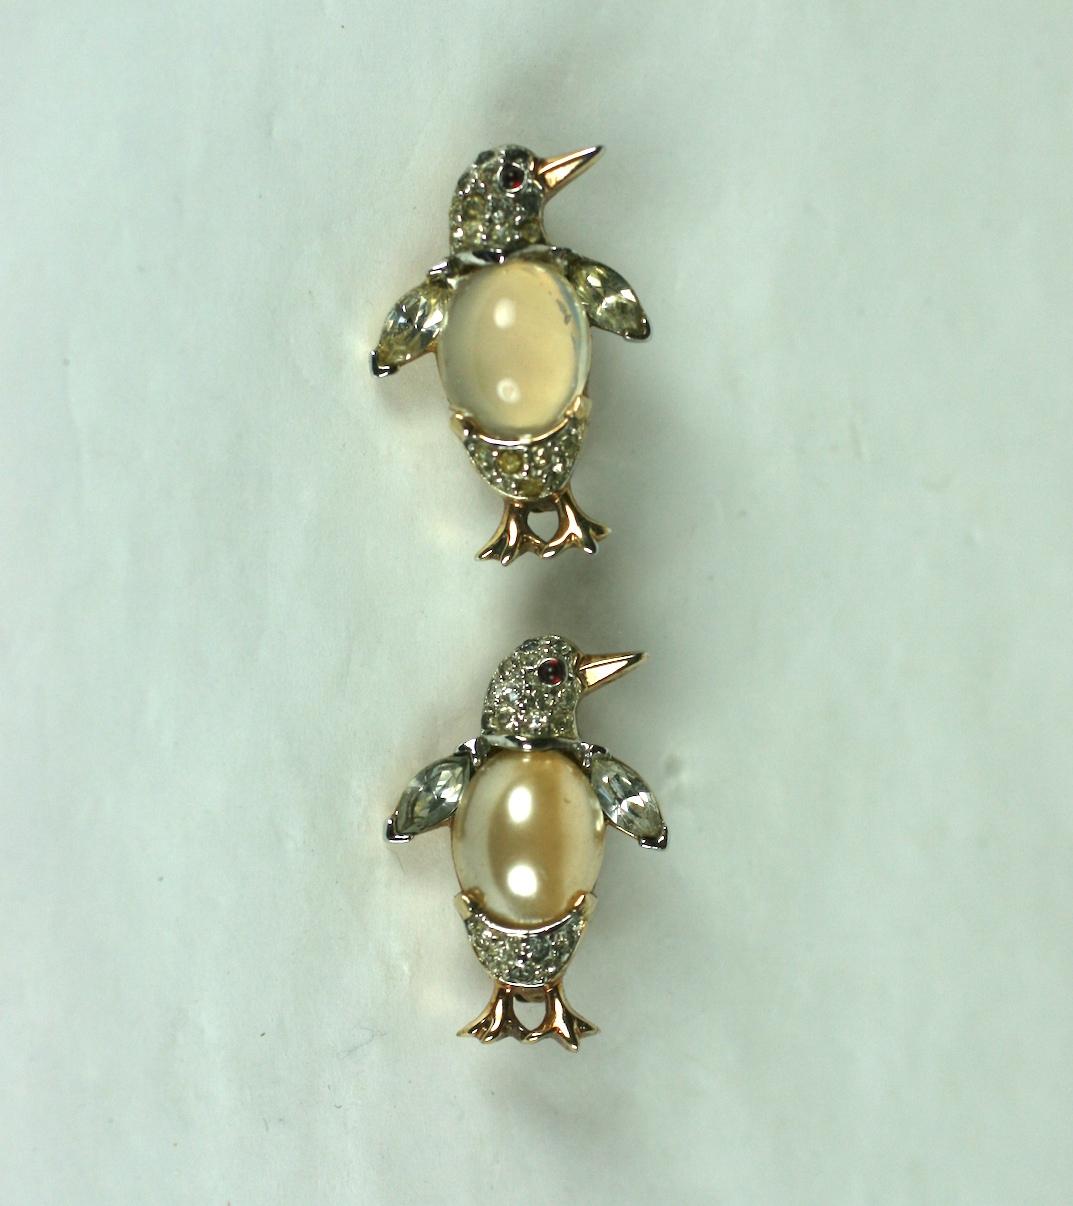 Pair of Alfred Philippe for Trifari crystal pave miniature pearl and jelly belly penguin brooches. Set in gold plated rhodium metal, with minute ruby cabochons and crystal marquise accents.
One is a pearl belly and the other is a moonstone jelly